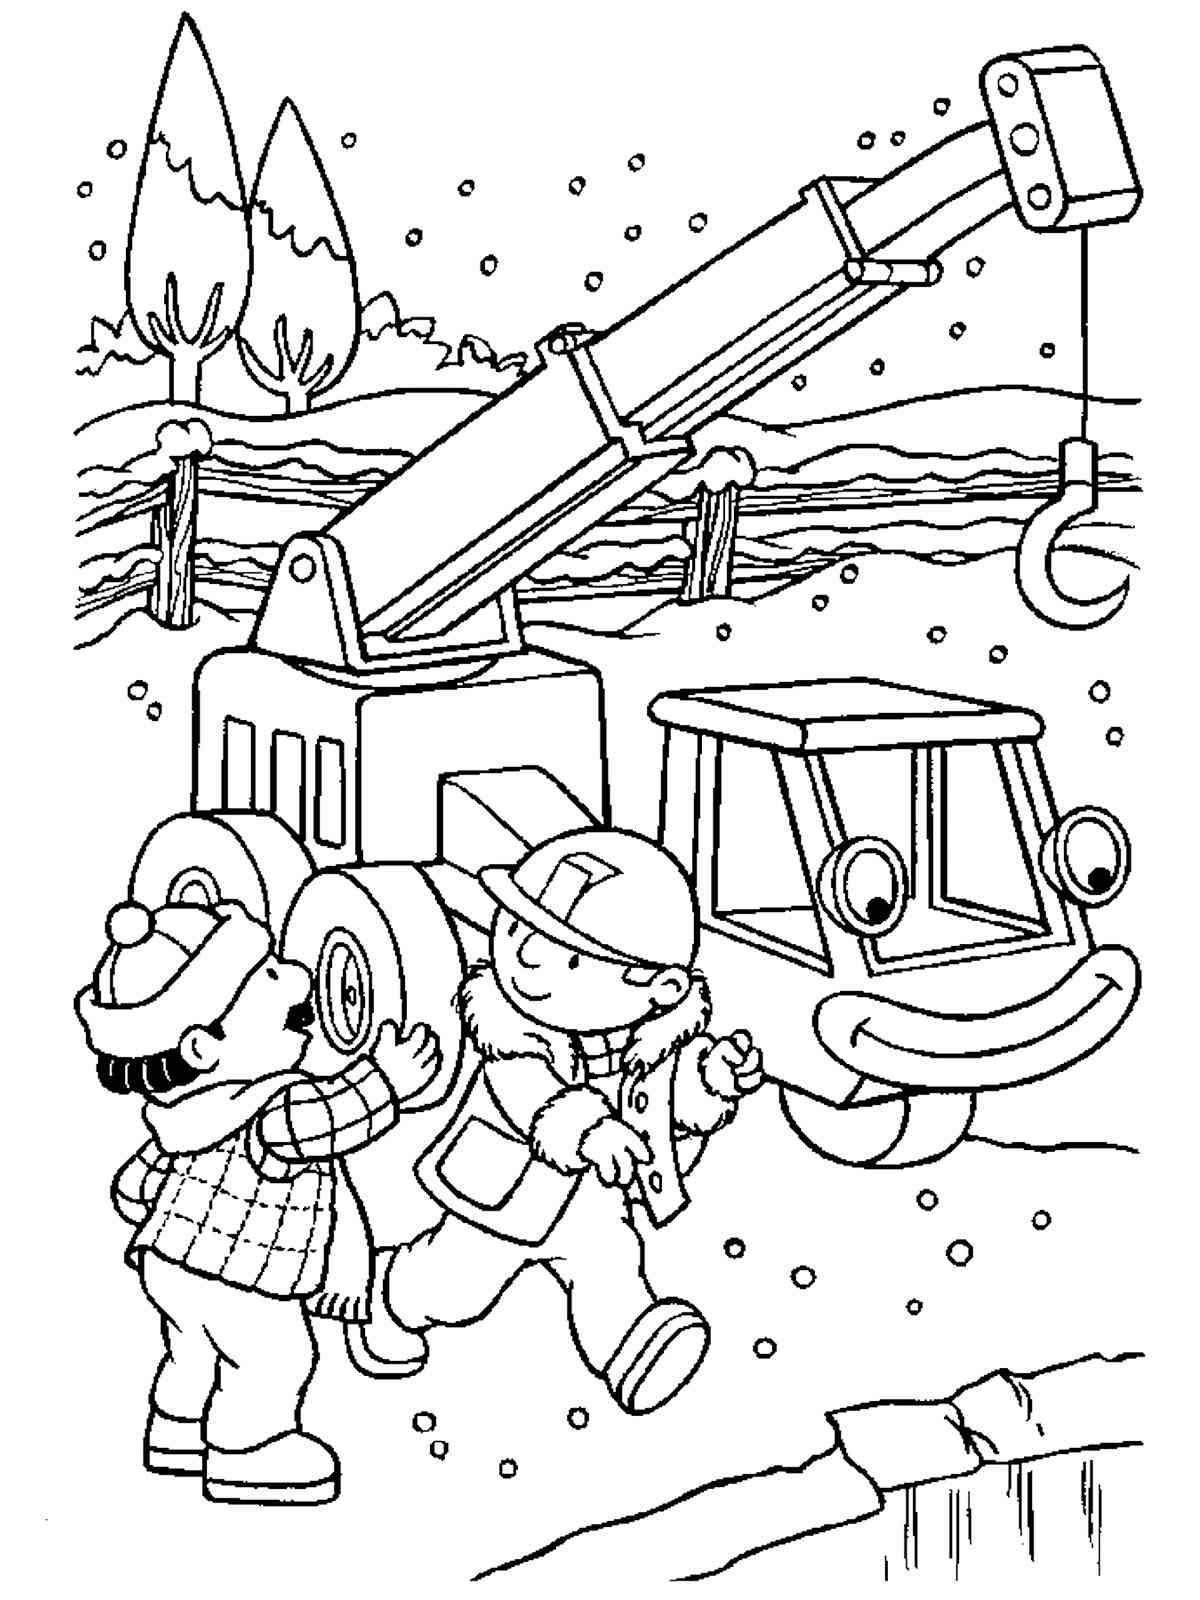 Bob The Builder 51 coloring page